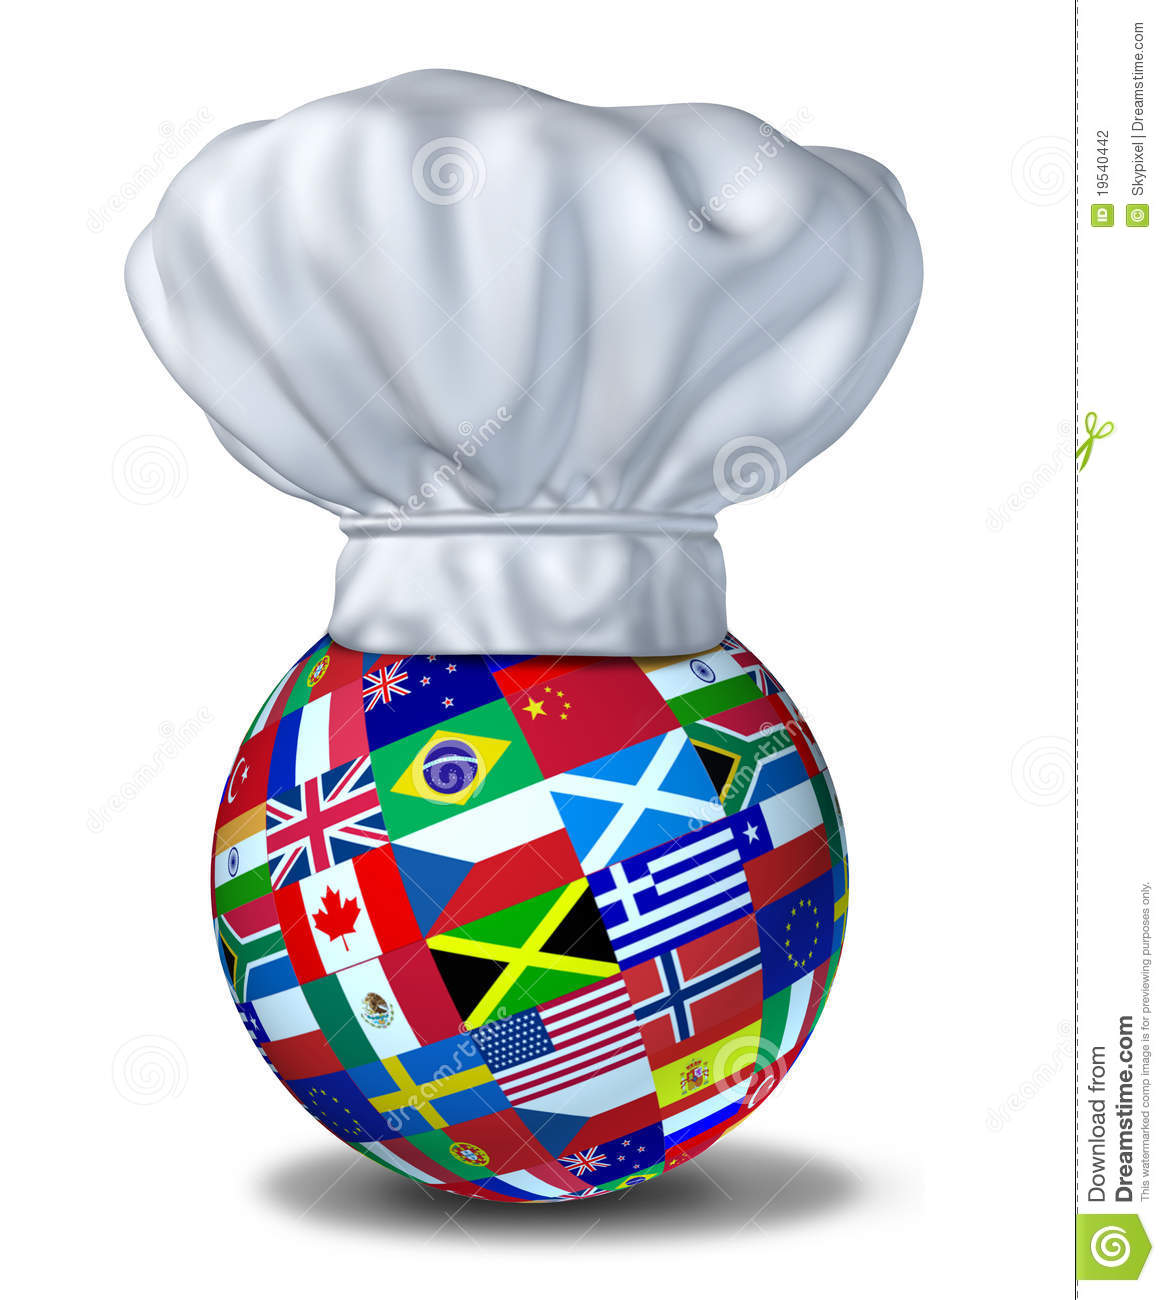 International Foods And Cuisines Of The World Represented By A